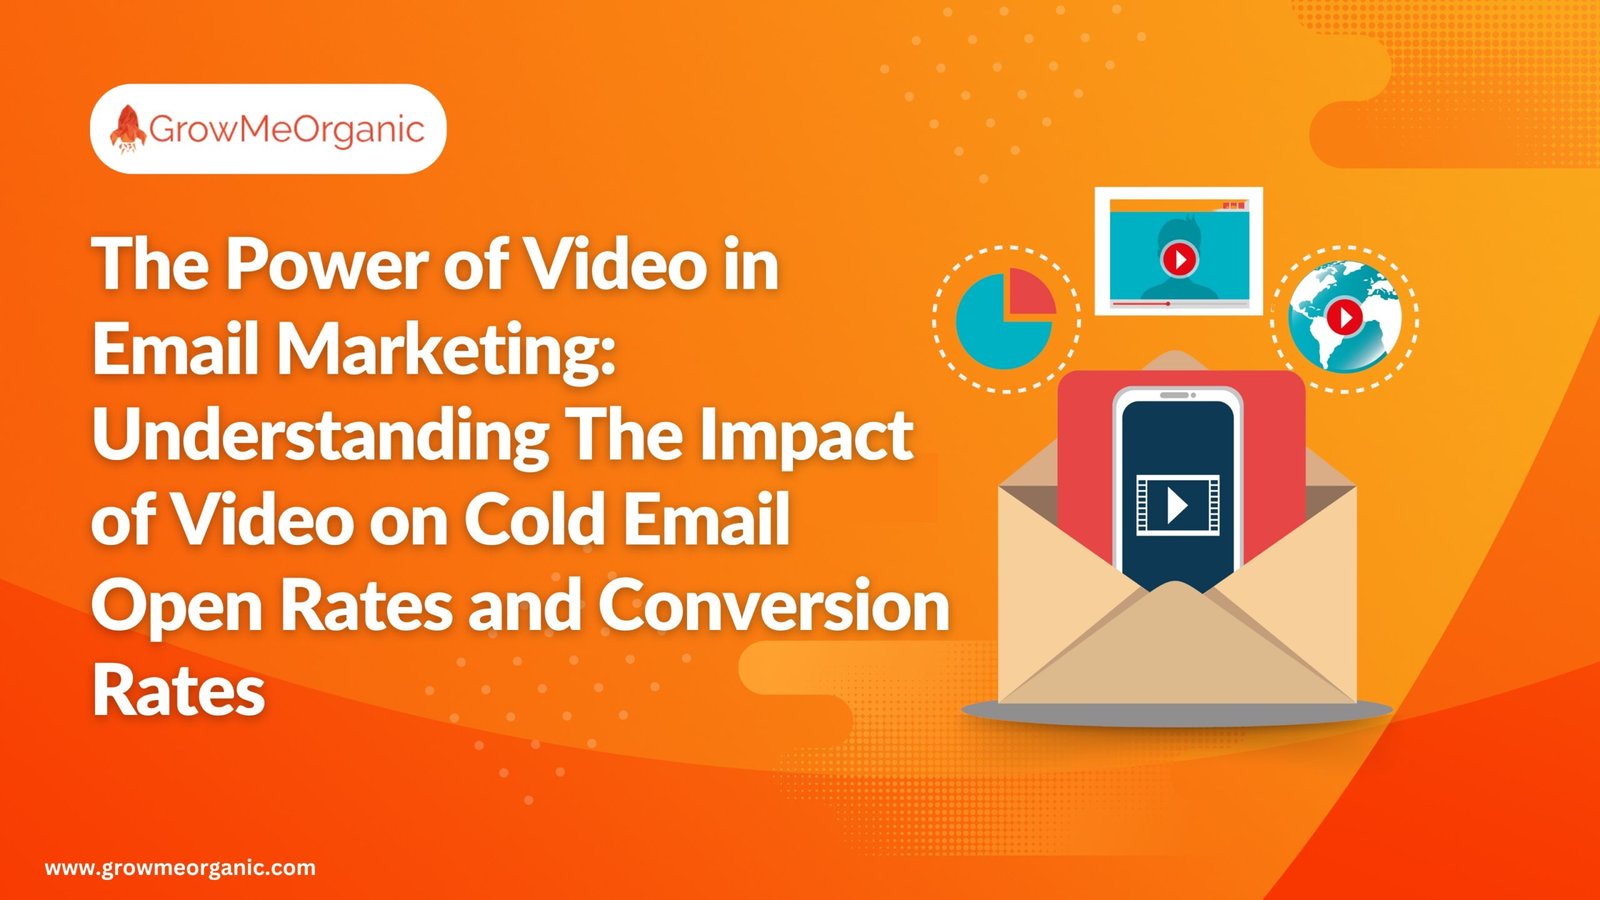 The Power of Video in Email Marketing: Understanding The Impact of Video on Cold Email Open Rates and Conversion Rates